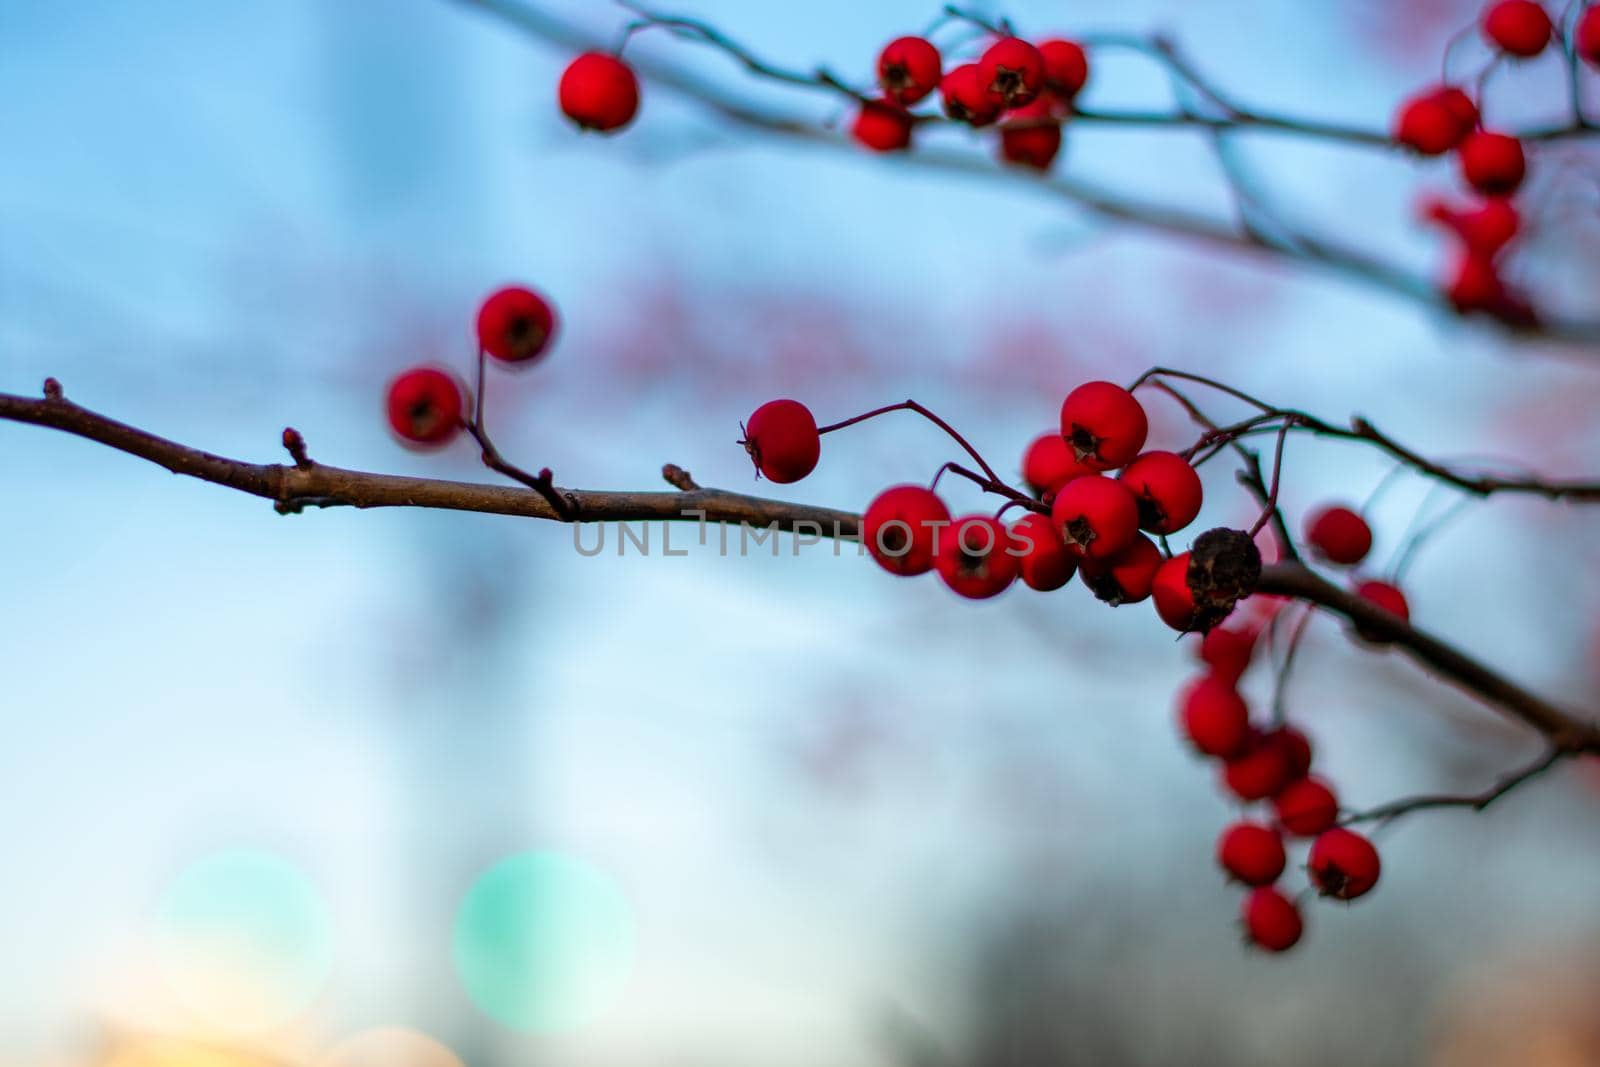 A Tree Branch Covered in Small Red Berries by bju12290